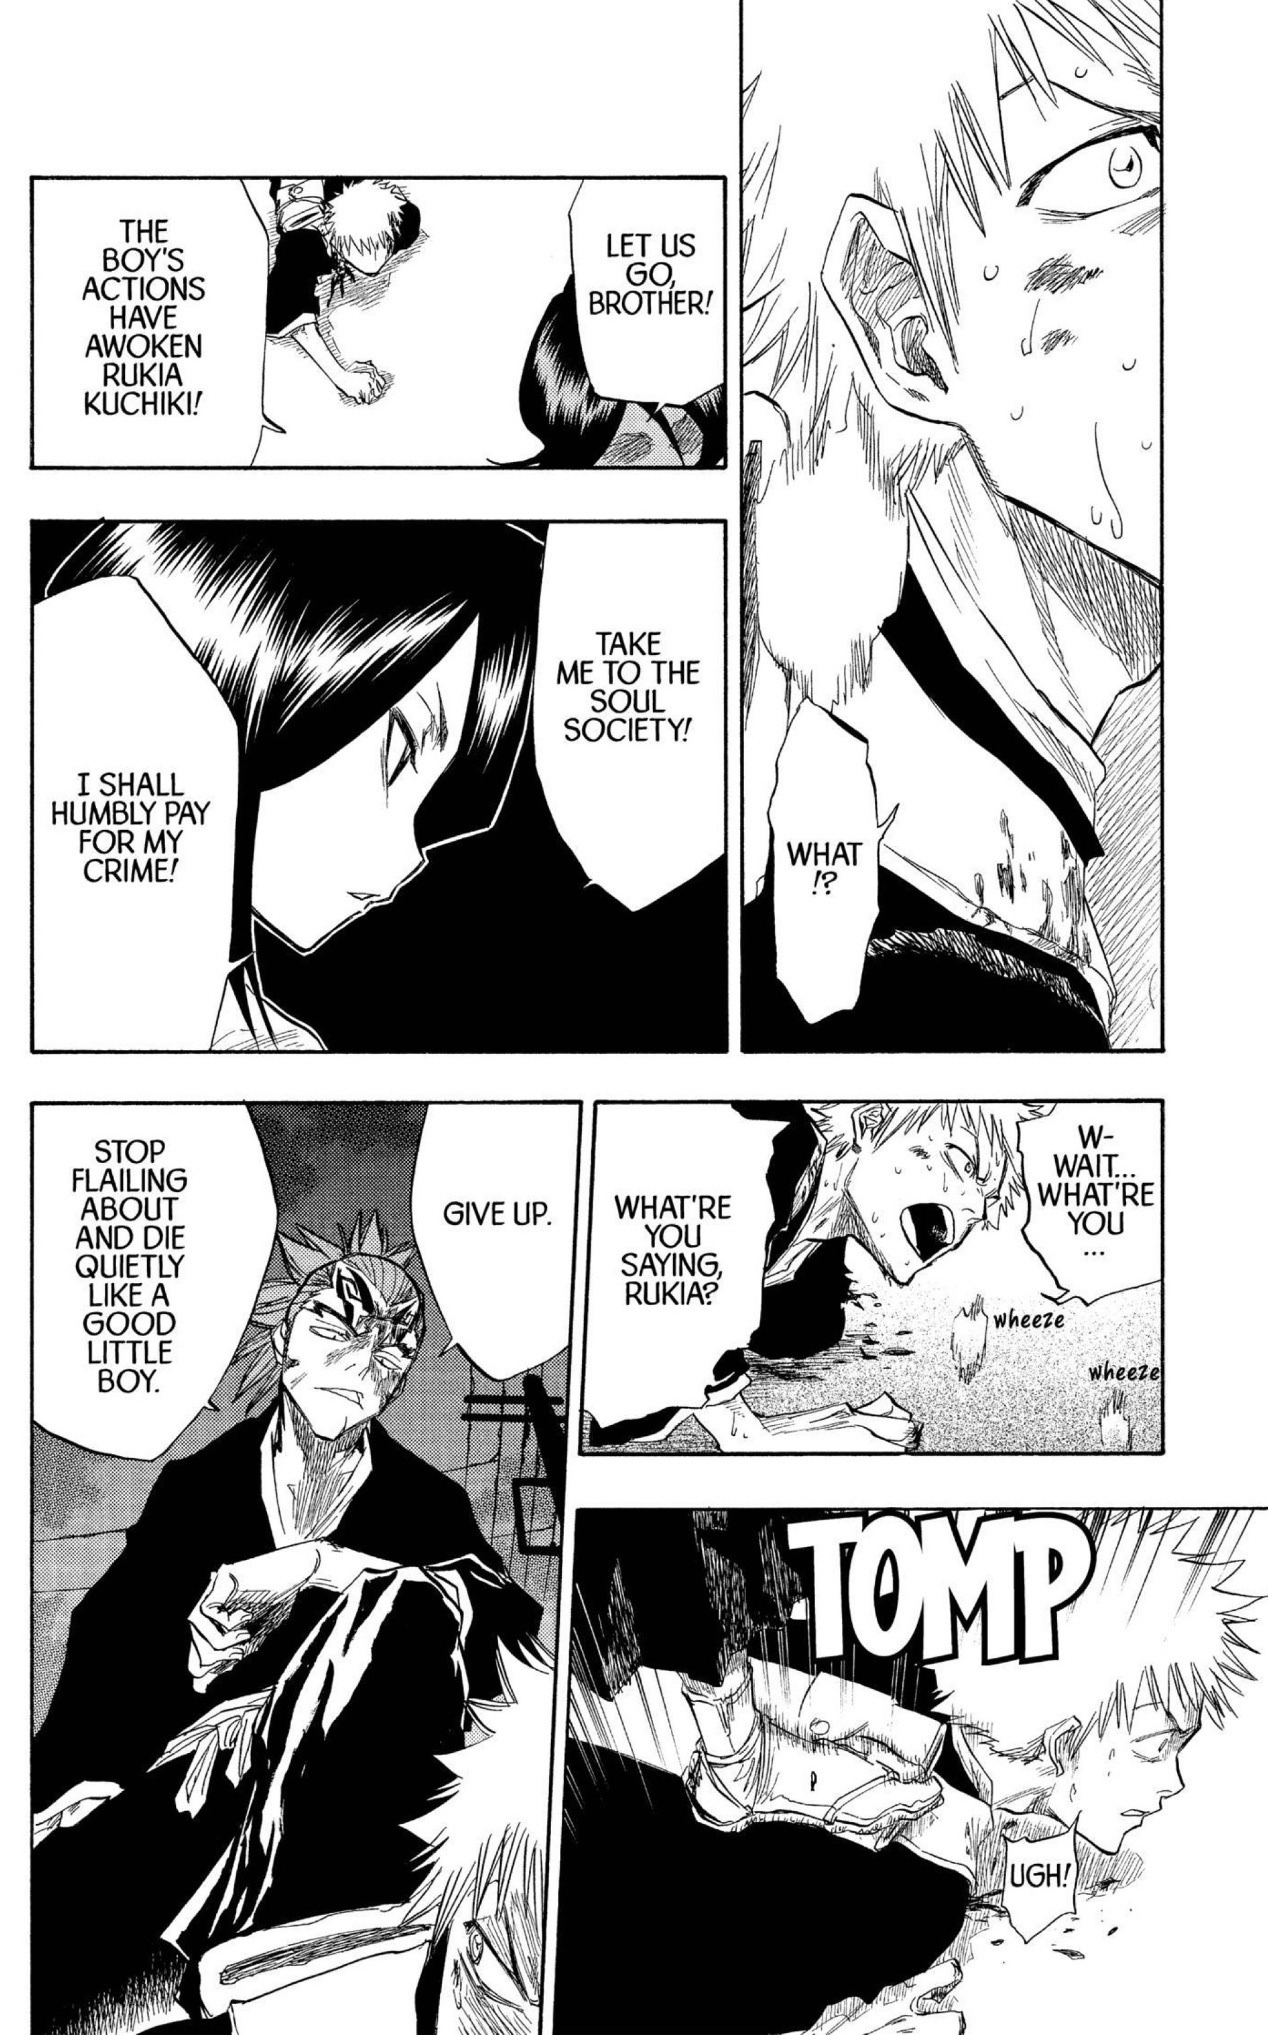 BLEACH: TYBWA Gets Special Ending for Episode 7